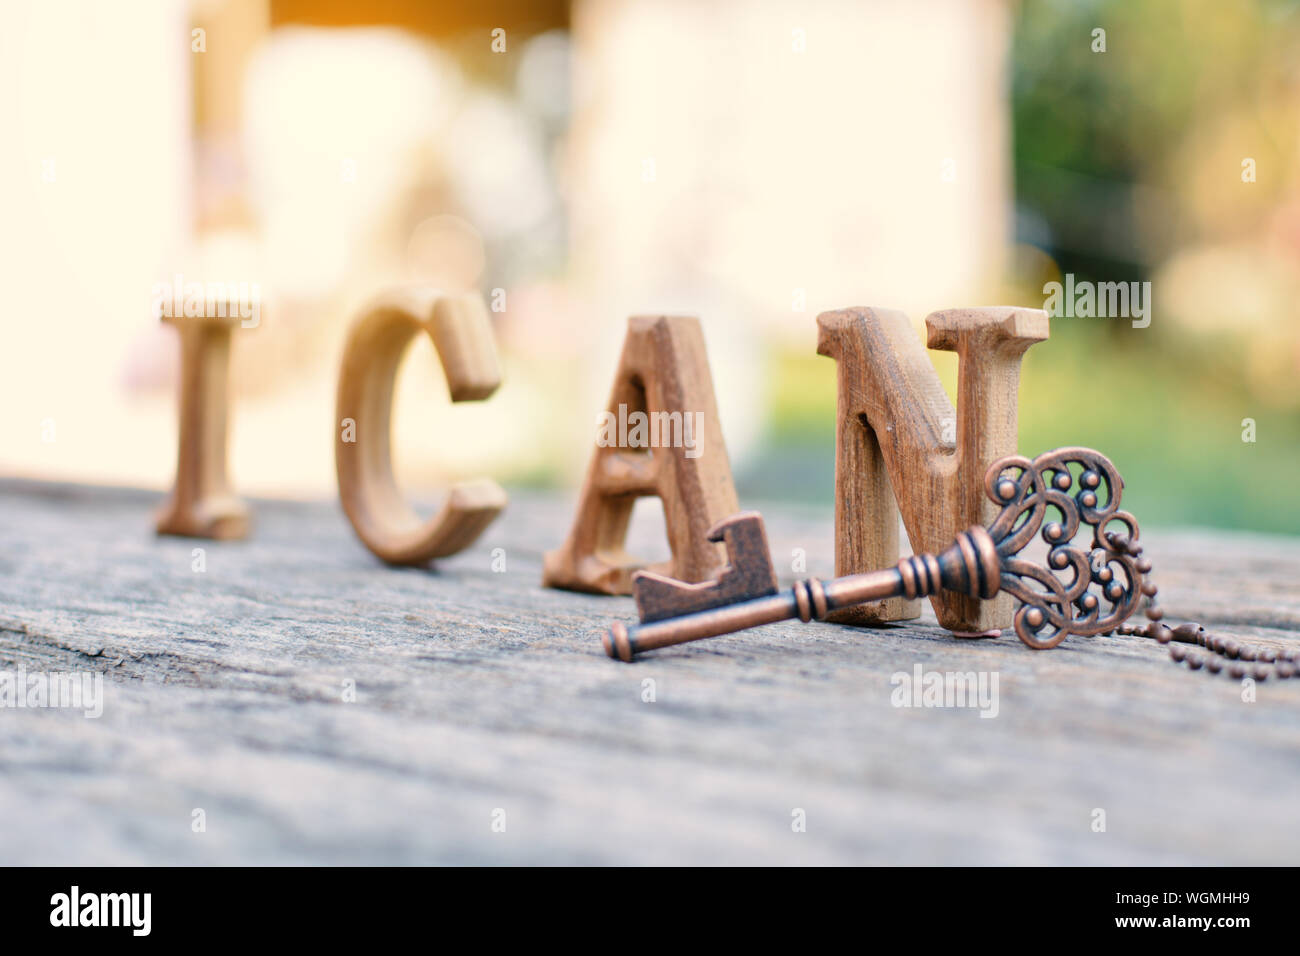 Surface Level View Of Wooden Text And Antique Metallic Key On Table Stock Photo